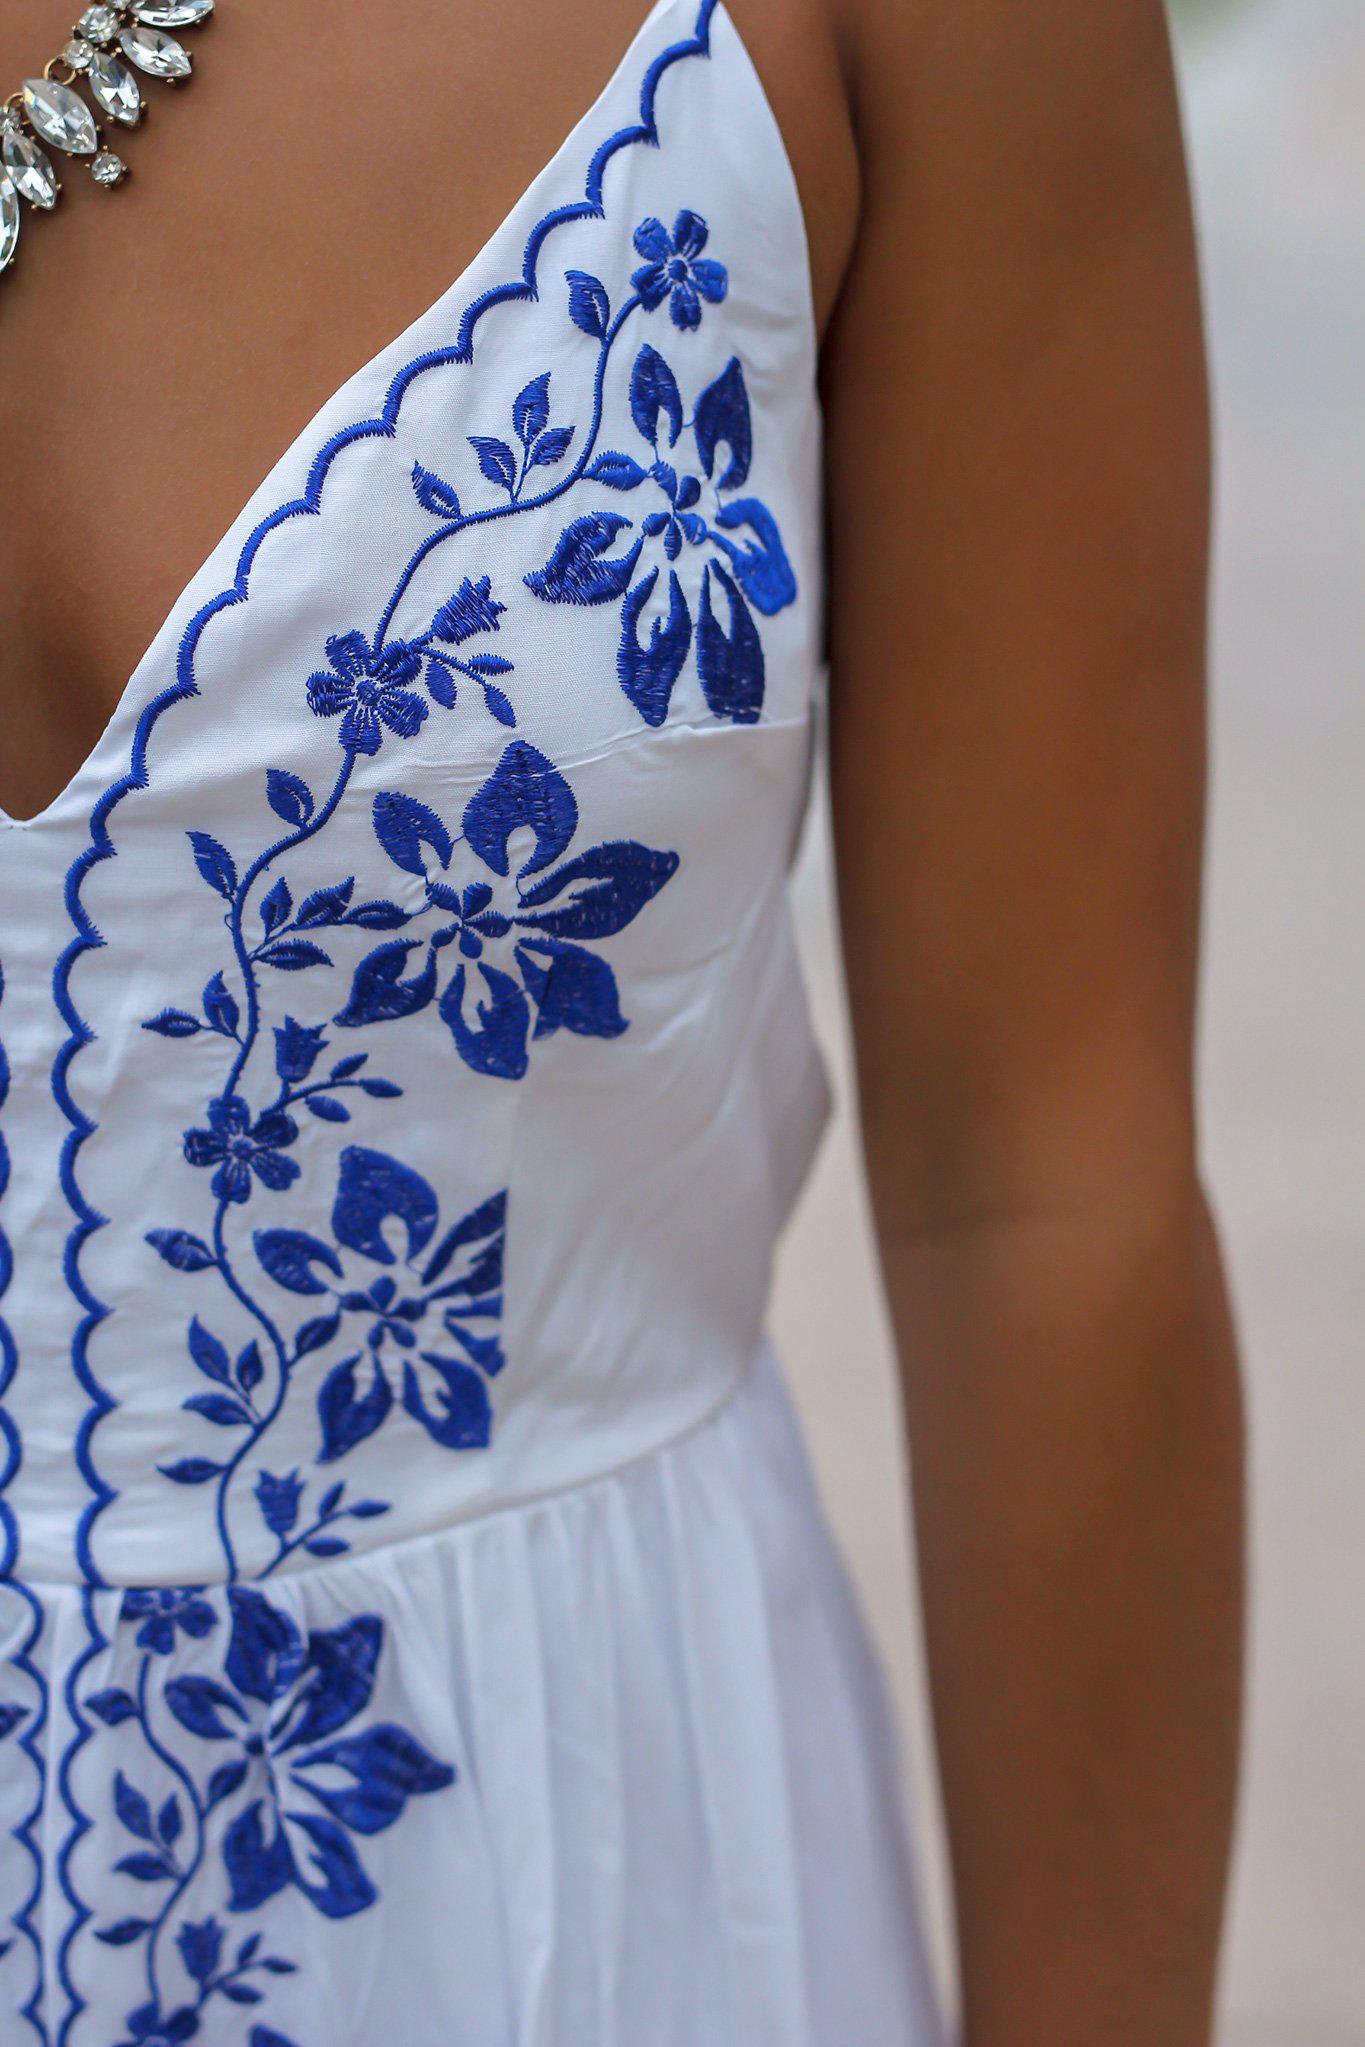 Ivory Maxi Dress with Floral Embroidery